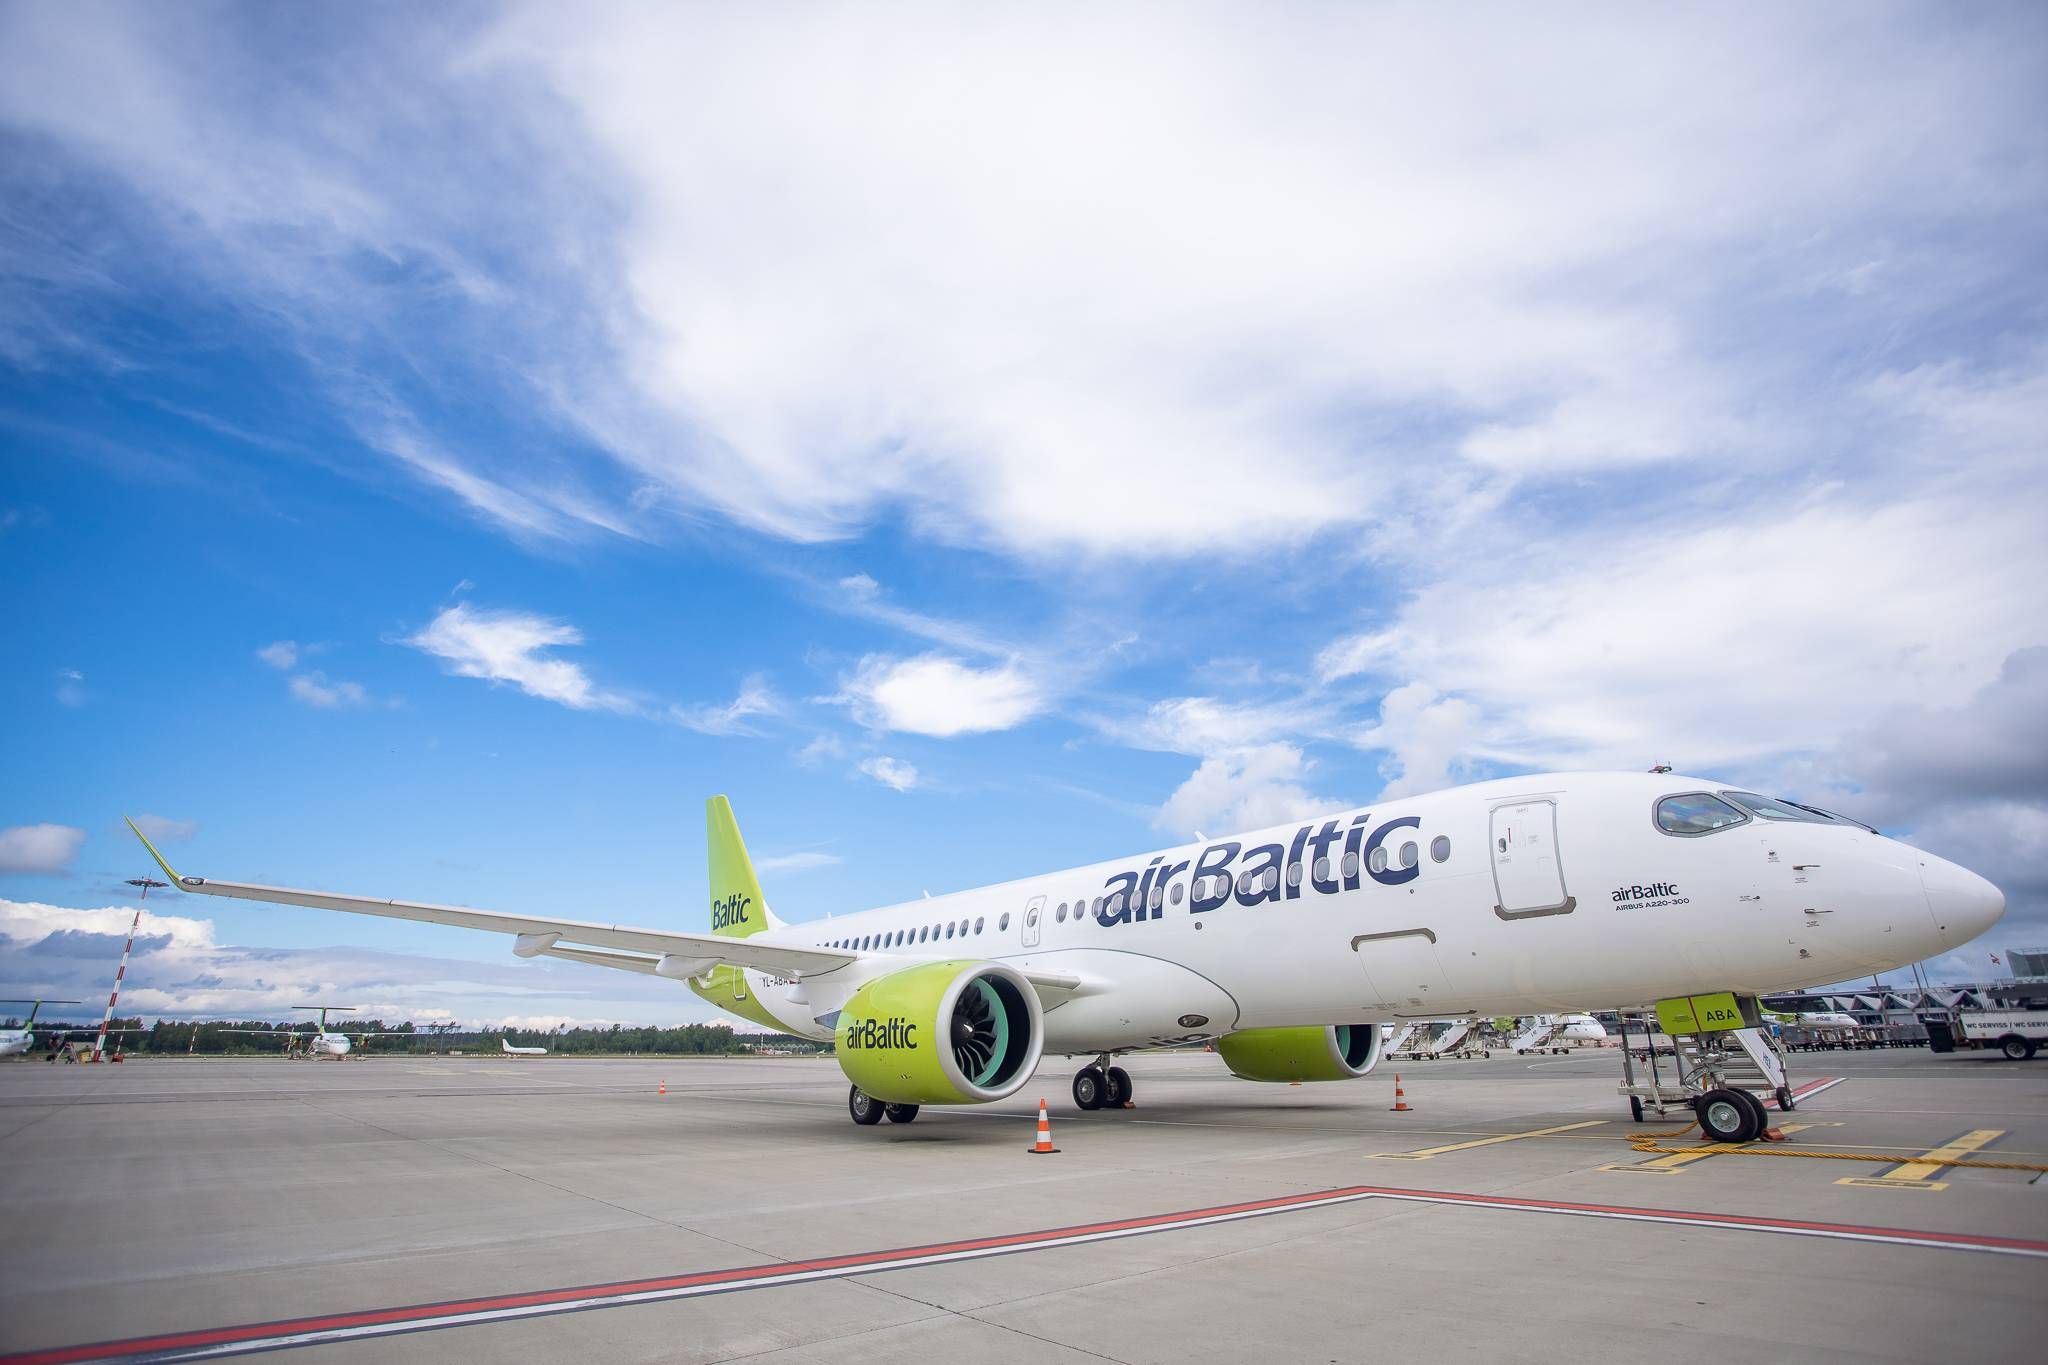 An airBaltic Airbus A220-300 parked at an airport.